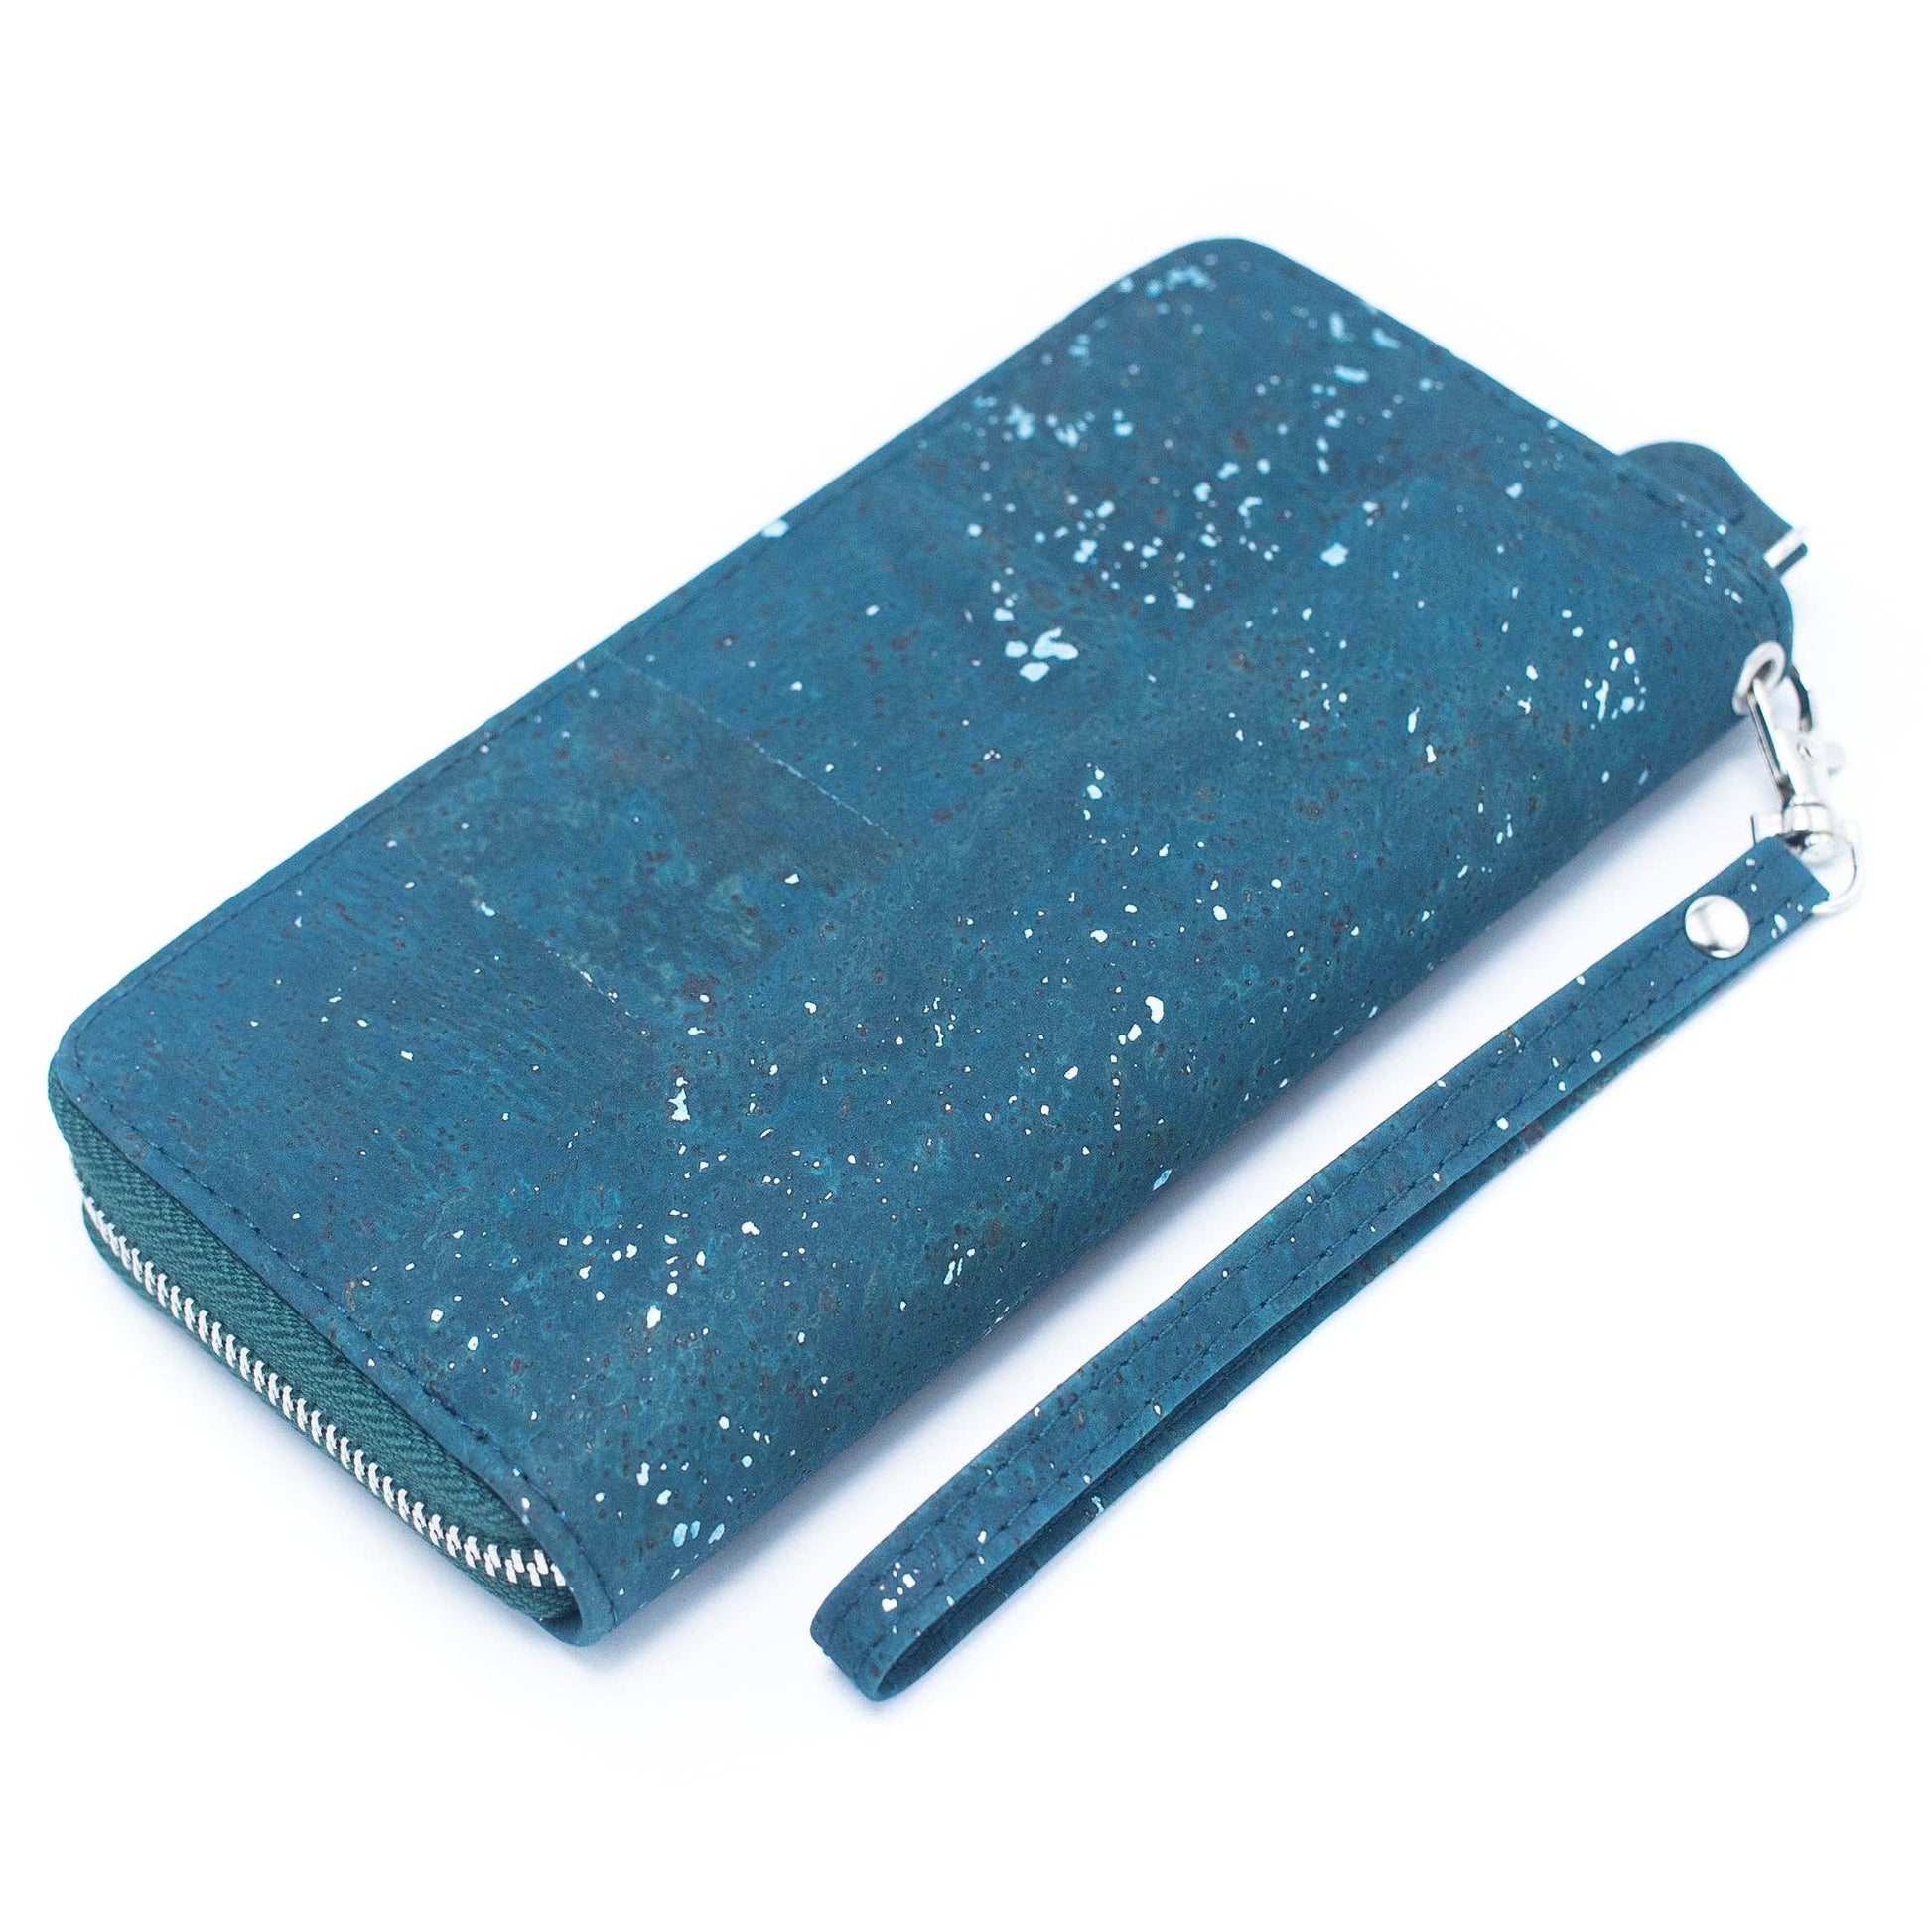 Blue Mixed w/ Silver Accents Women's Cork Card Wallet | THE CORK COLLECTION